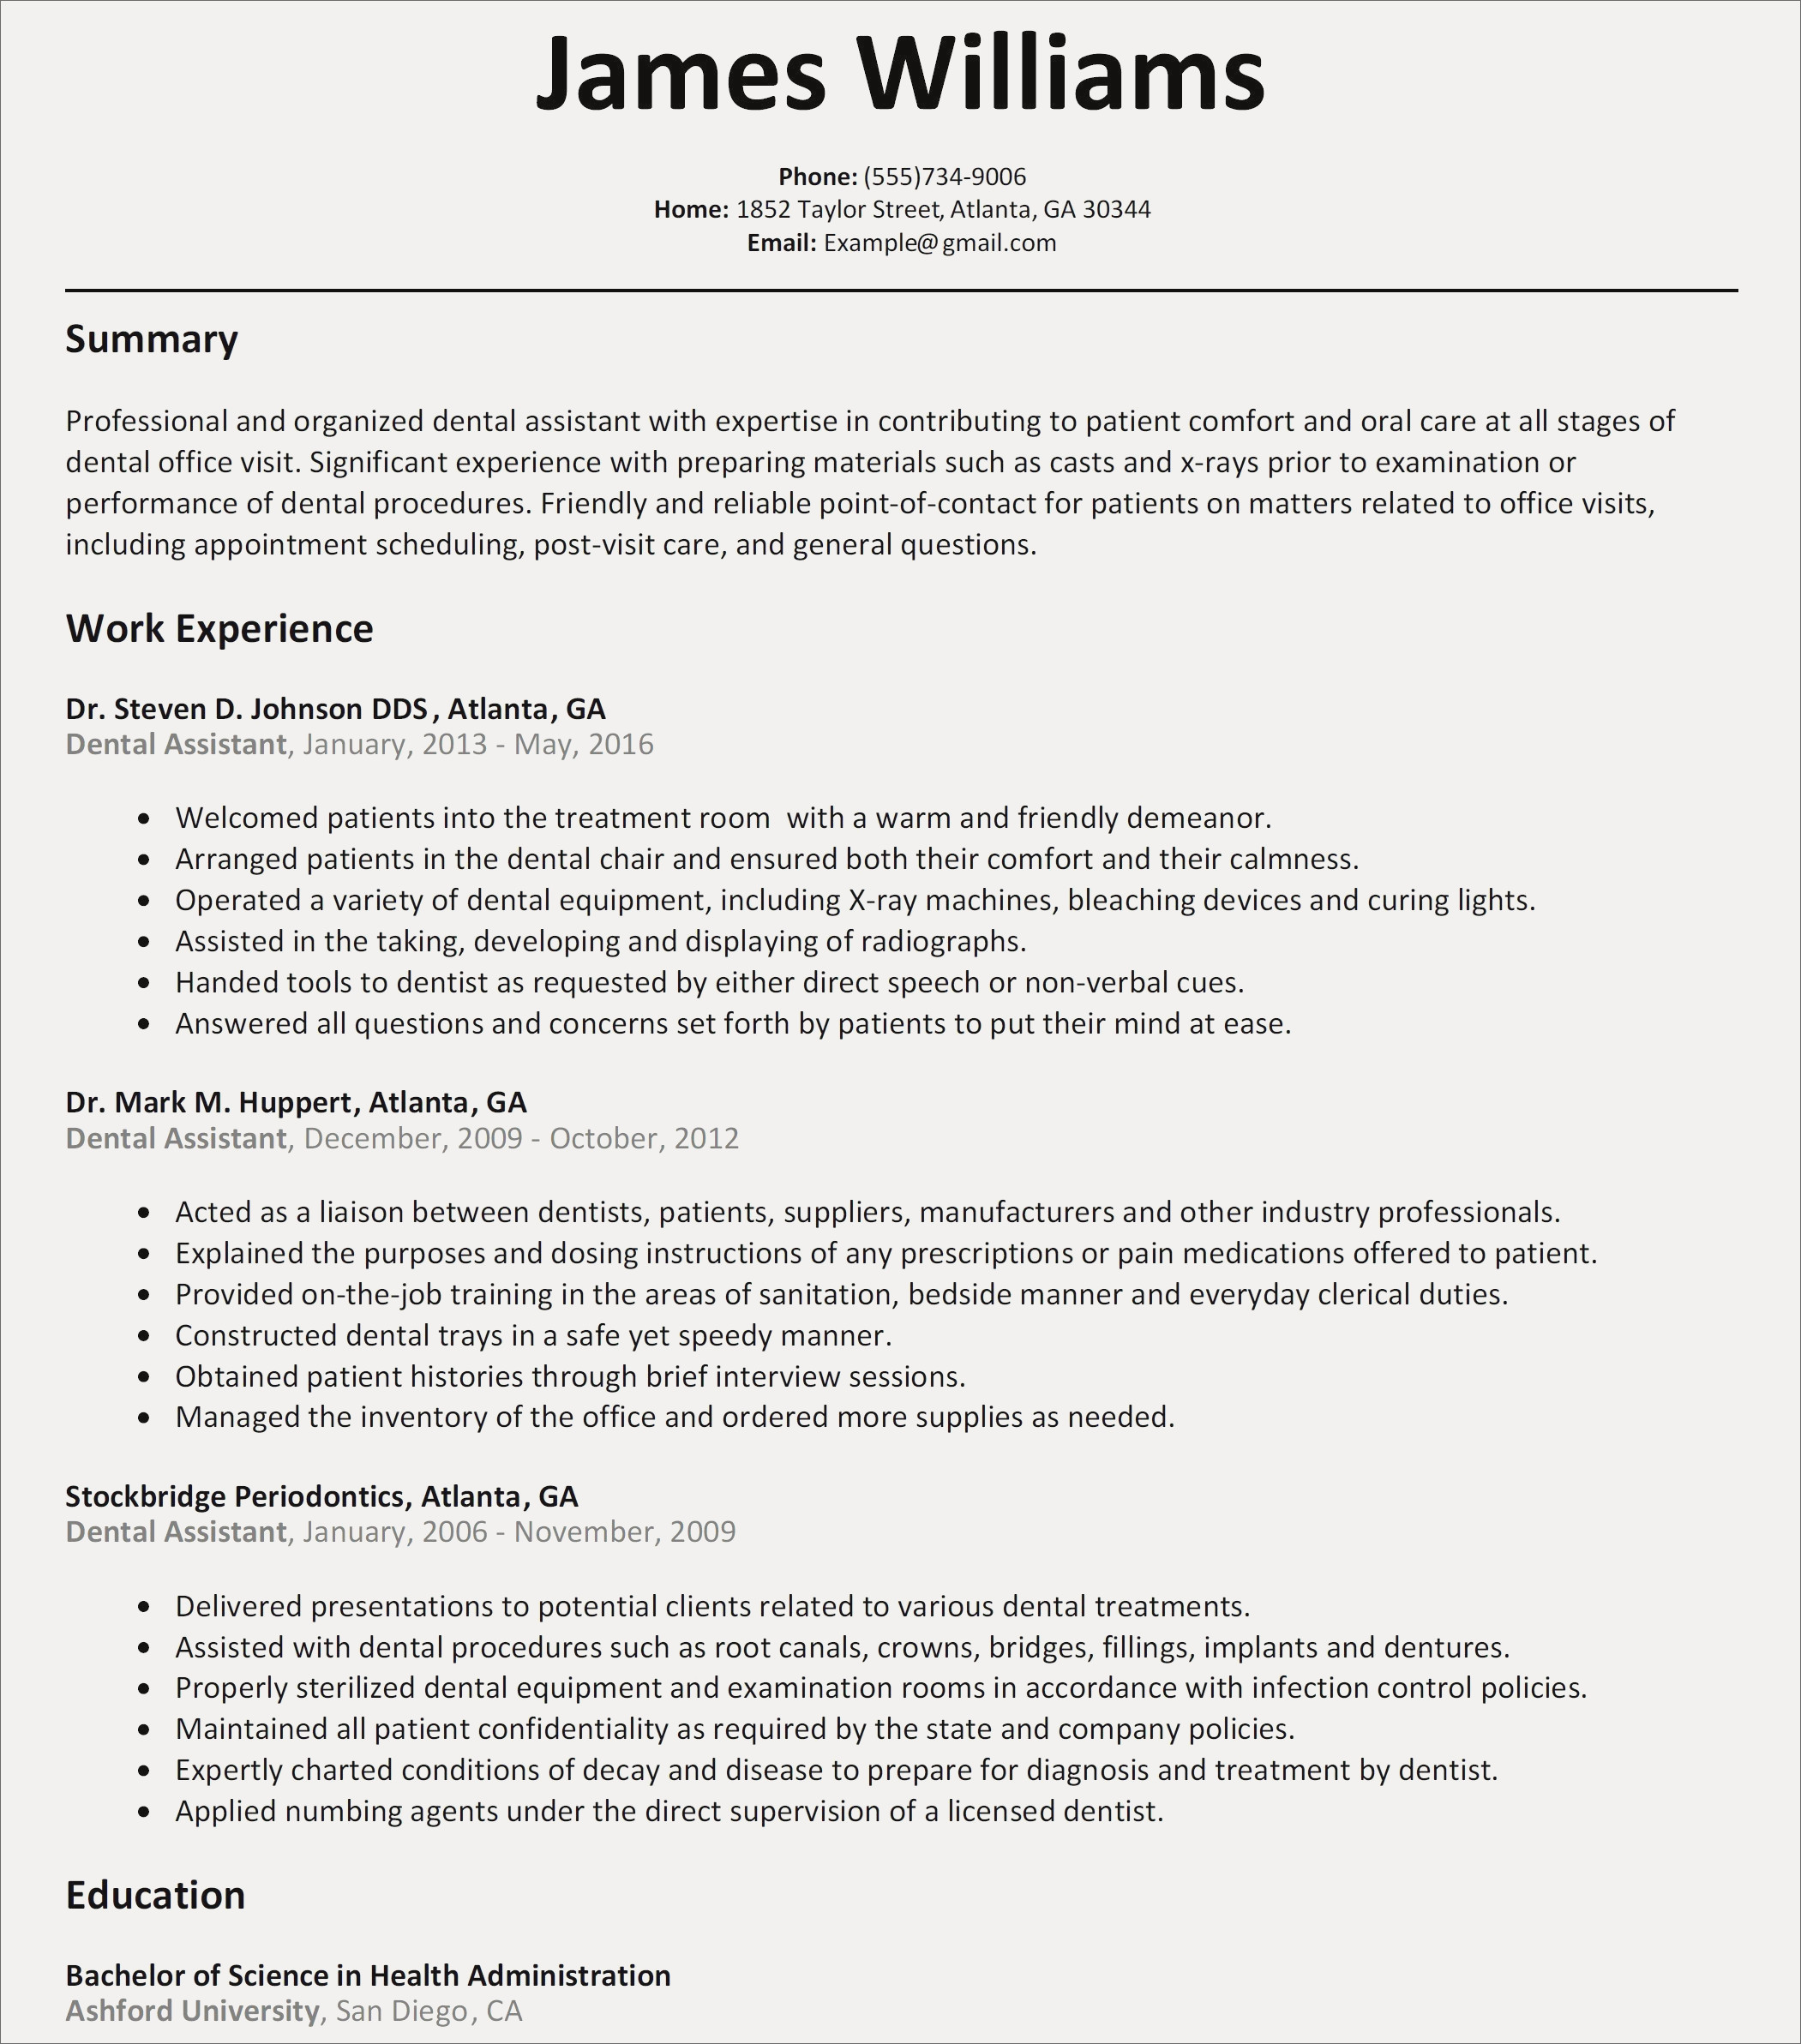 Resume Cover Letter Example Cover Letter Resume Examples ... (2101 x 2385 Pixel)